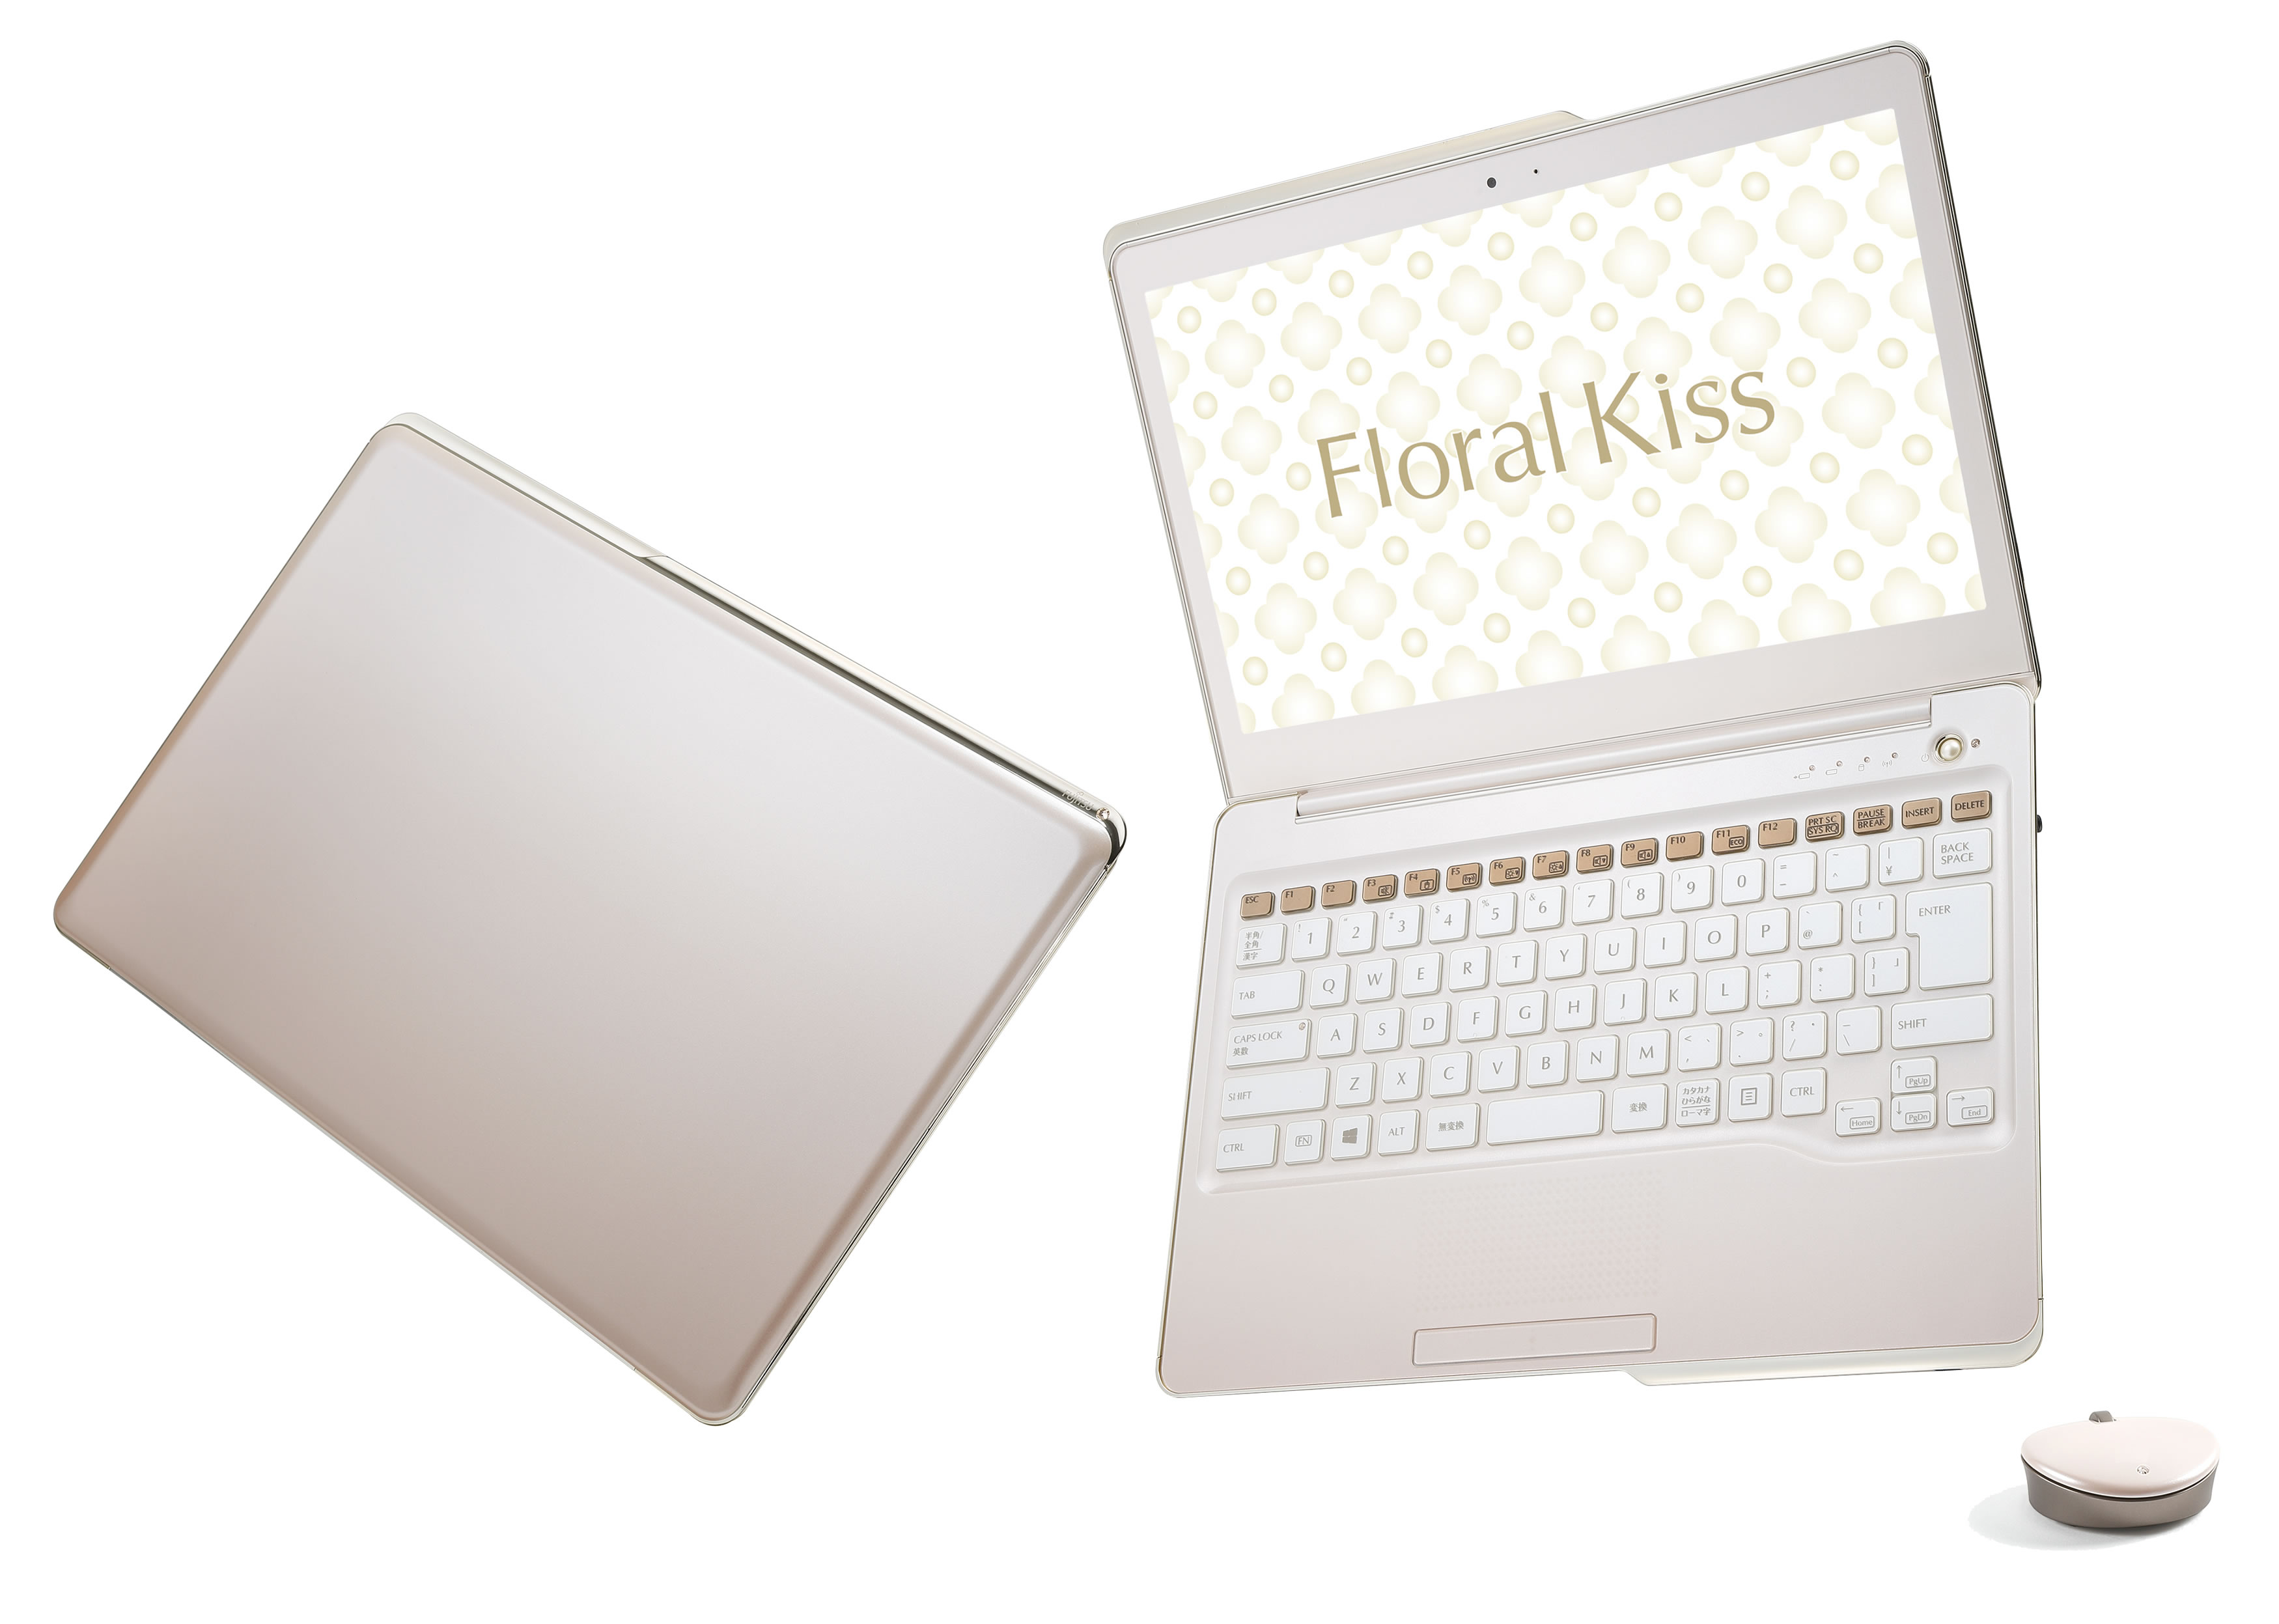 Picture of Fujitsu Floral Kiss notebook